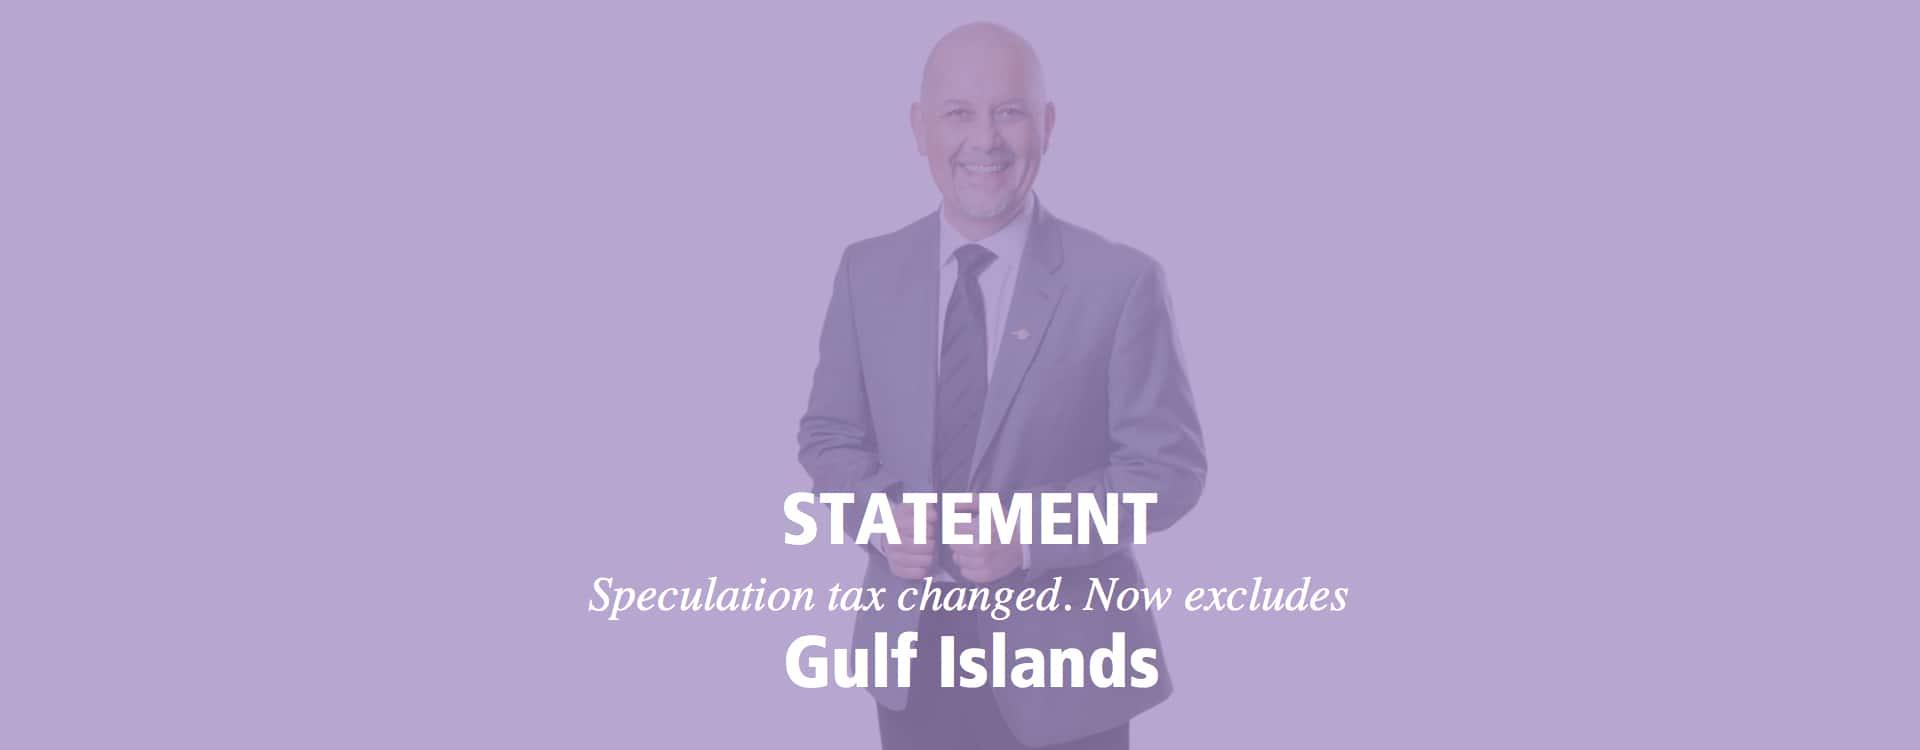 Statement: Speculation tax changed. Now excludes Gulf Islands.